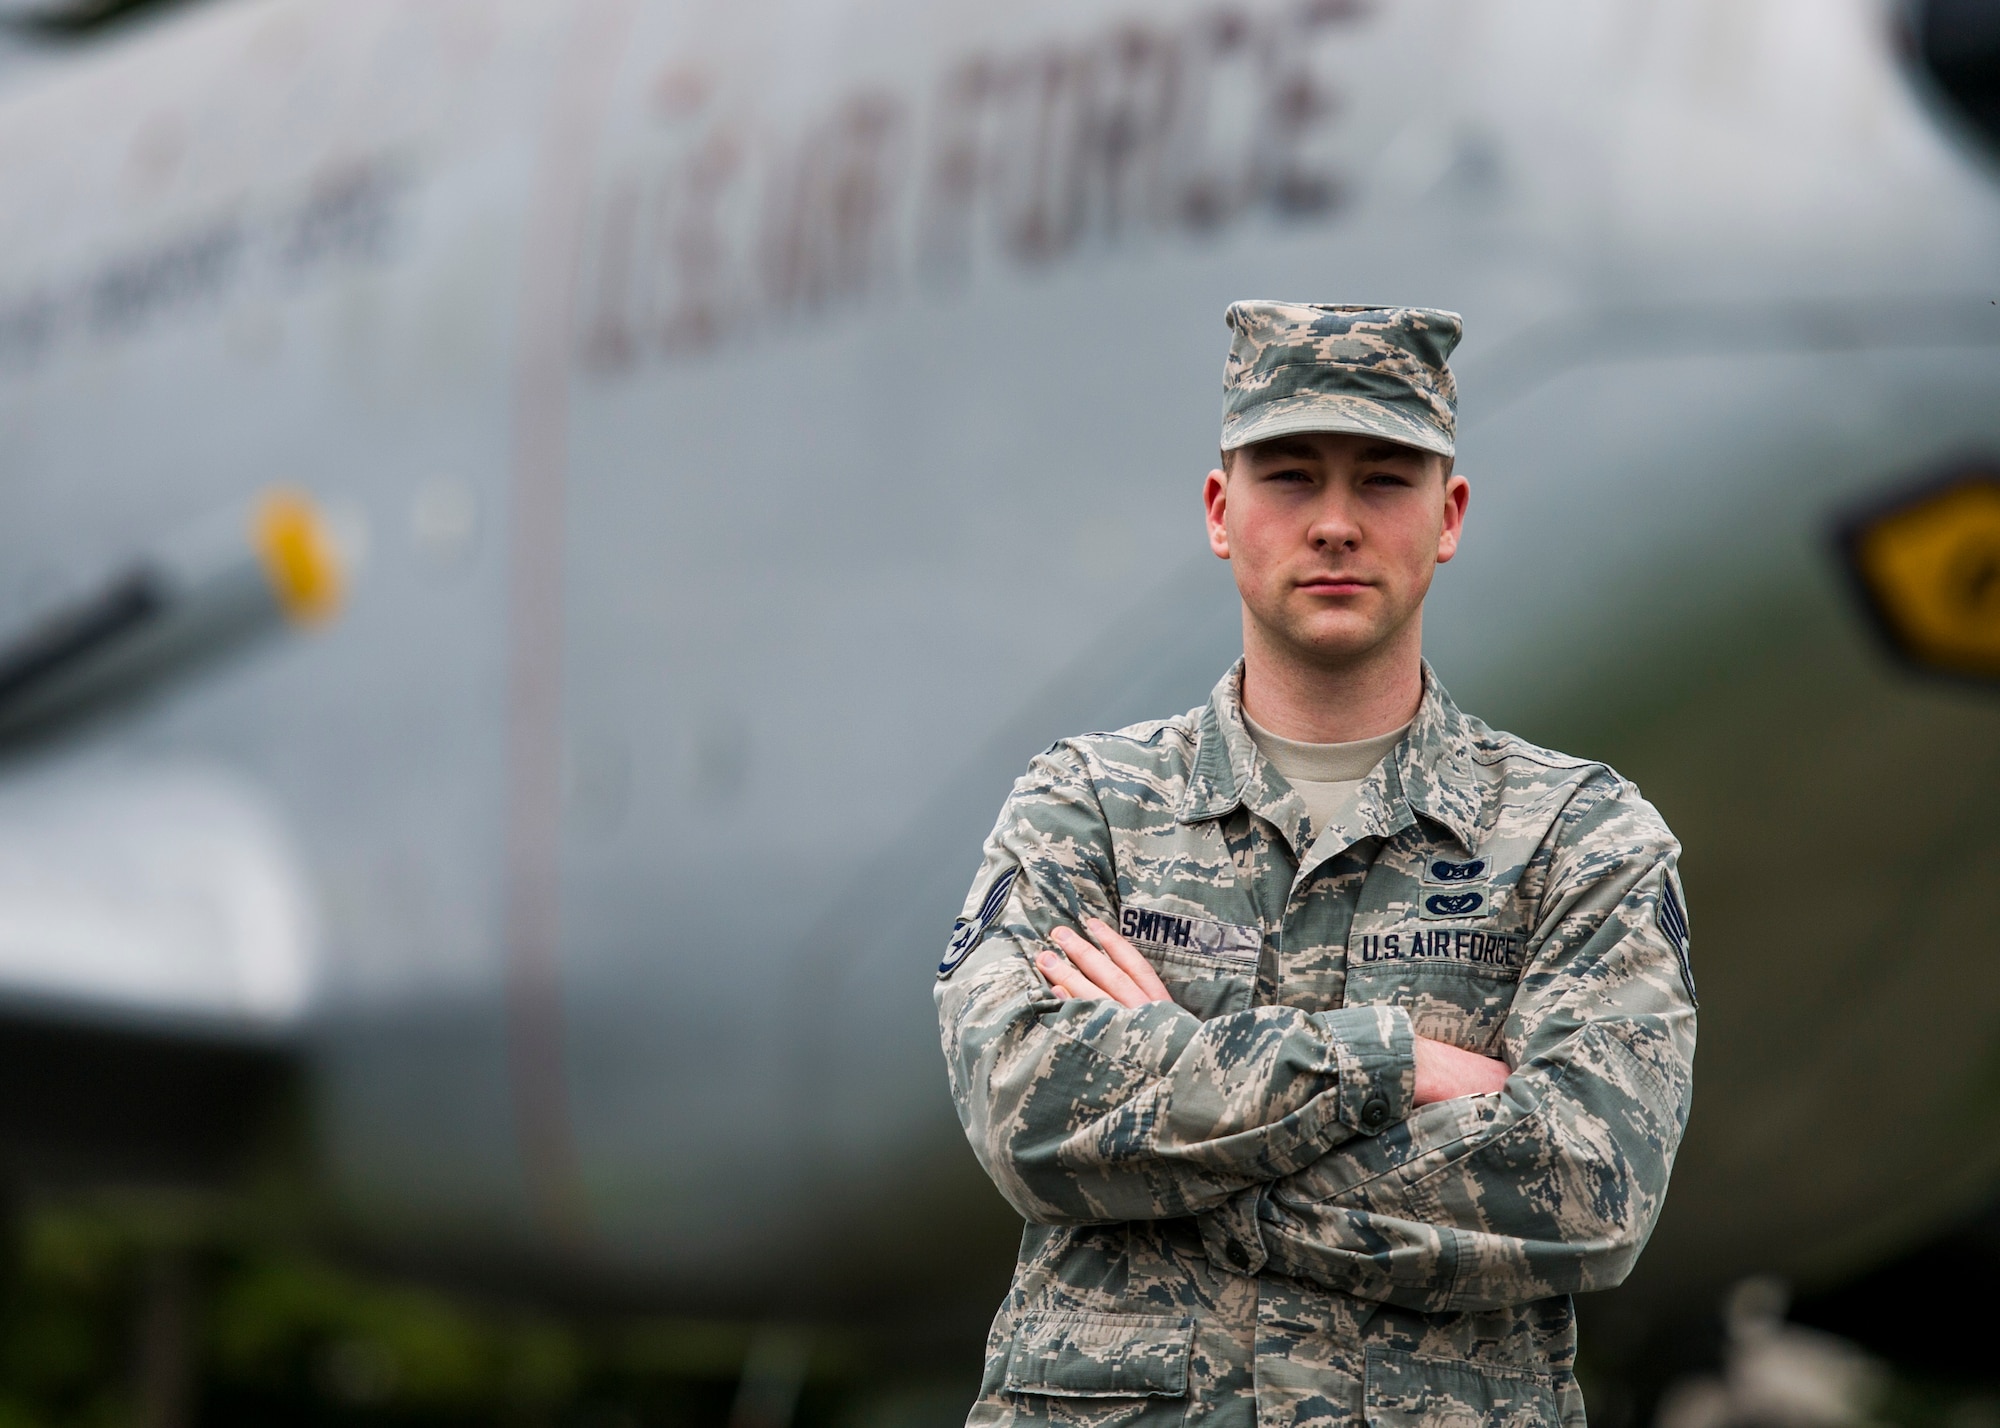 SSgt. David M. Smith, 446th Civil Engineer Squadron emergency management, stands at Joint-Base Lewis-McChord, WA, Apr. 1. Smith was recently awarded the John Levitow Award at Airman Leadership School as the only reservist in the class. Smith travelled to Eielson Air Force Base, AK in December to complete the training amongst a class composed mostly of active duty members from around the Air Force. (U.S. Air Force Reserve photo by SSgt. Daniel Liddicoet)